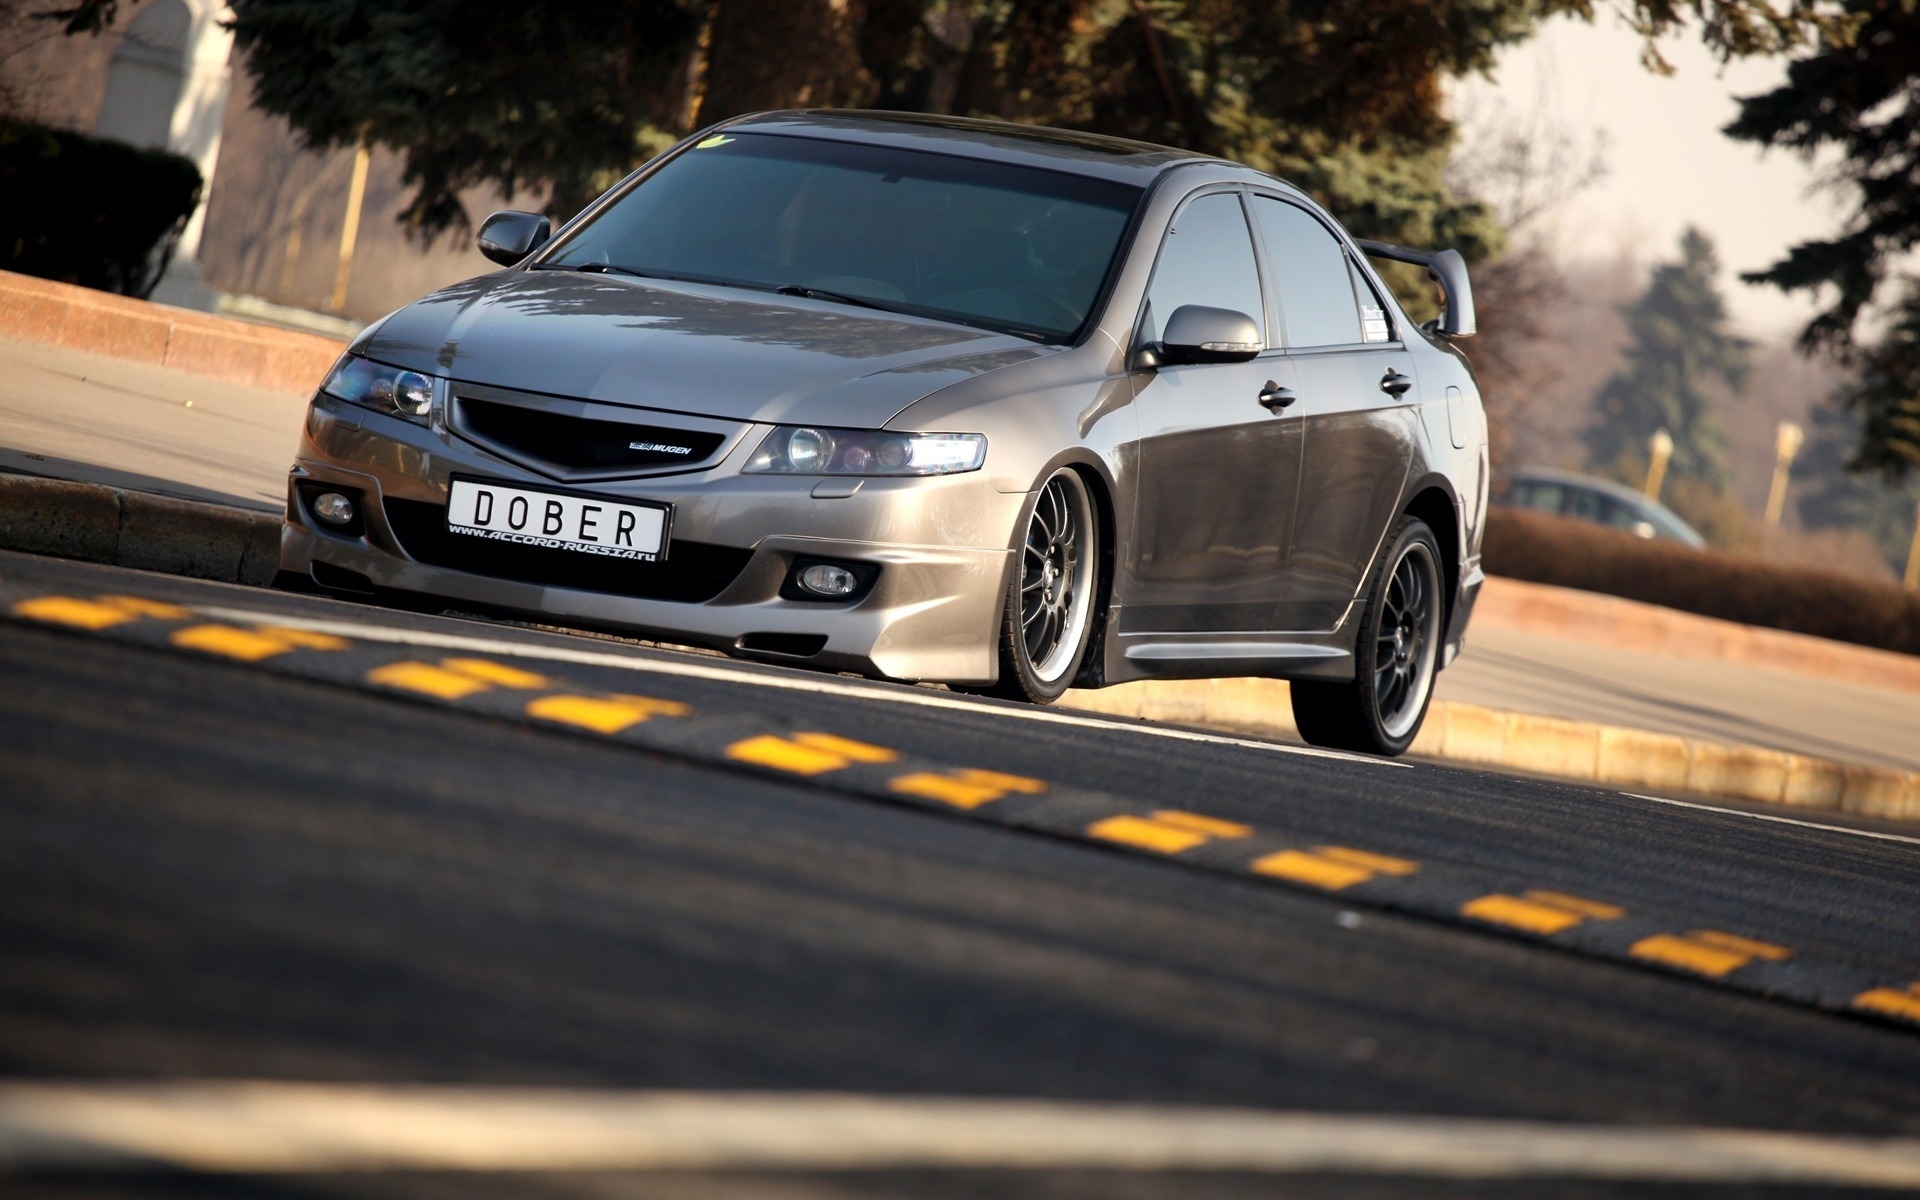 Honda Accord wallpapers and images   wallpapers pictures photos